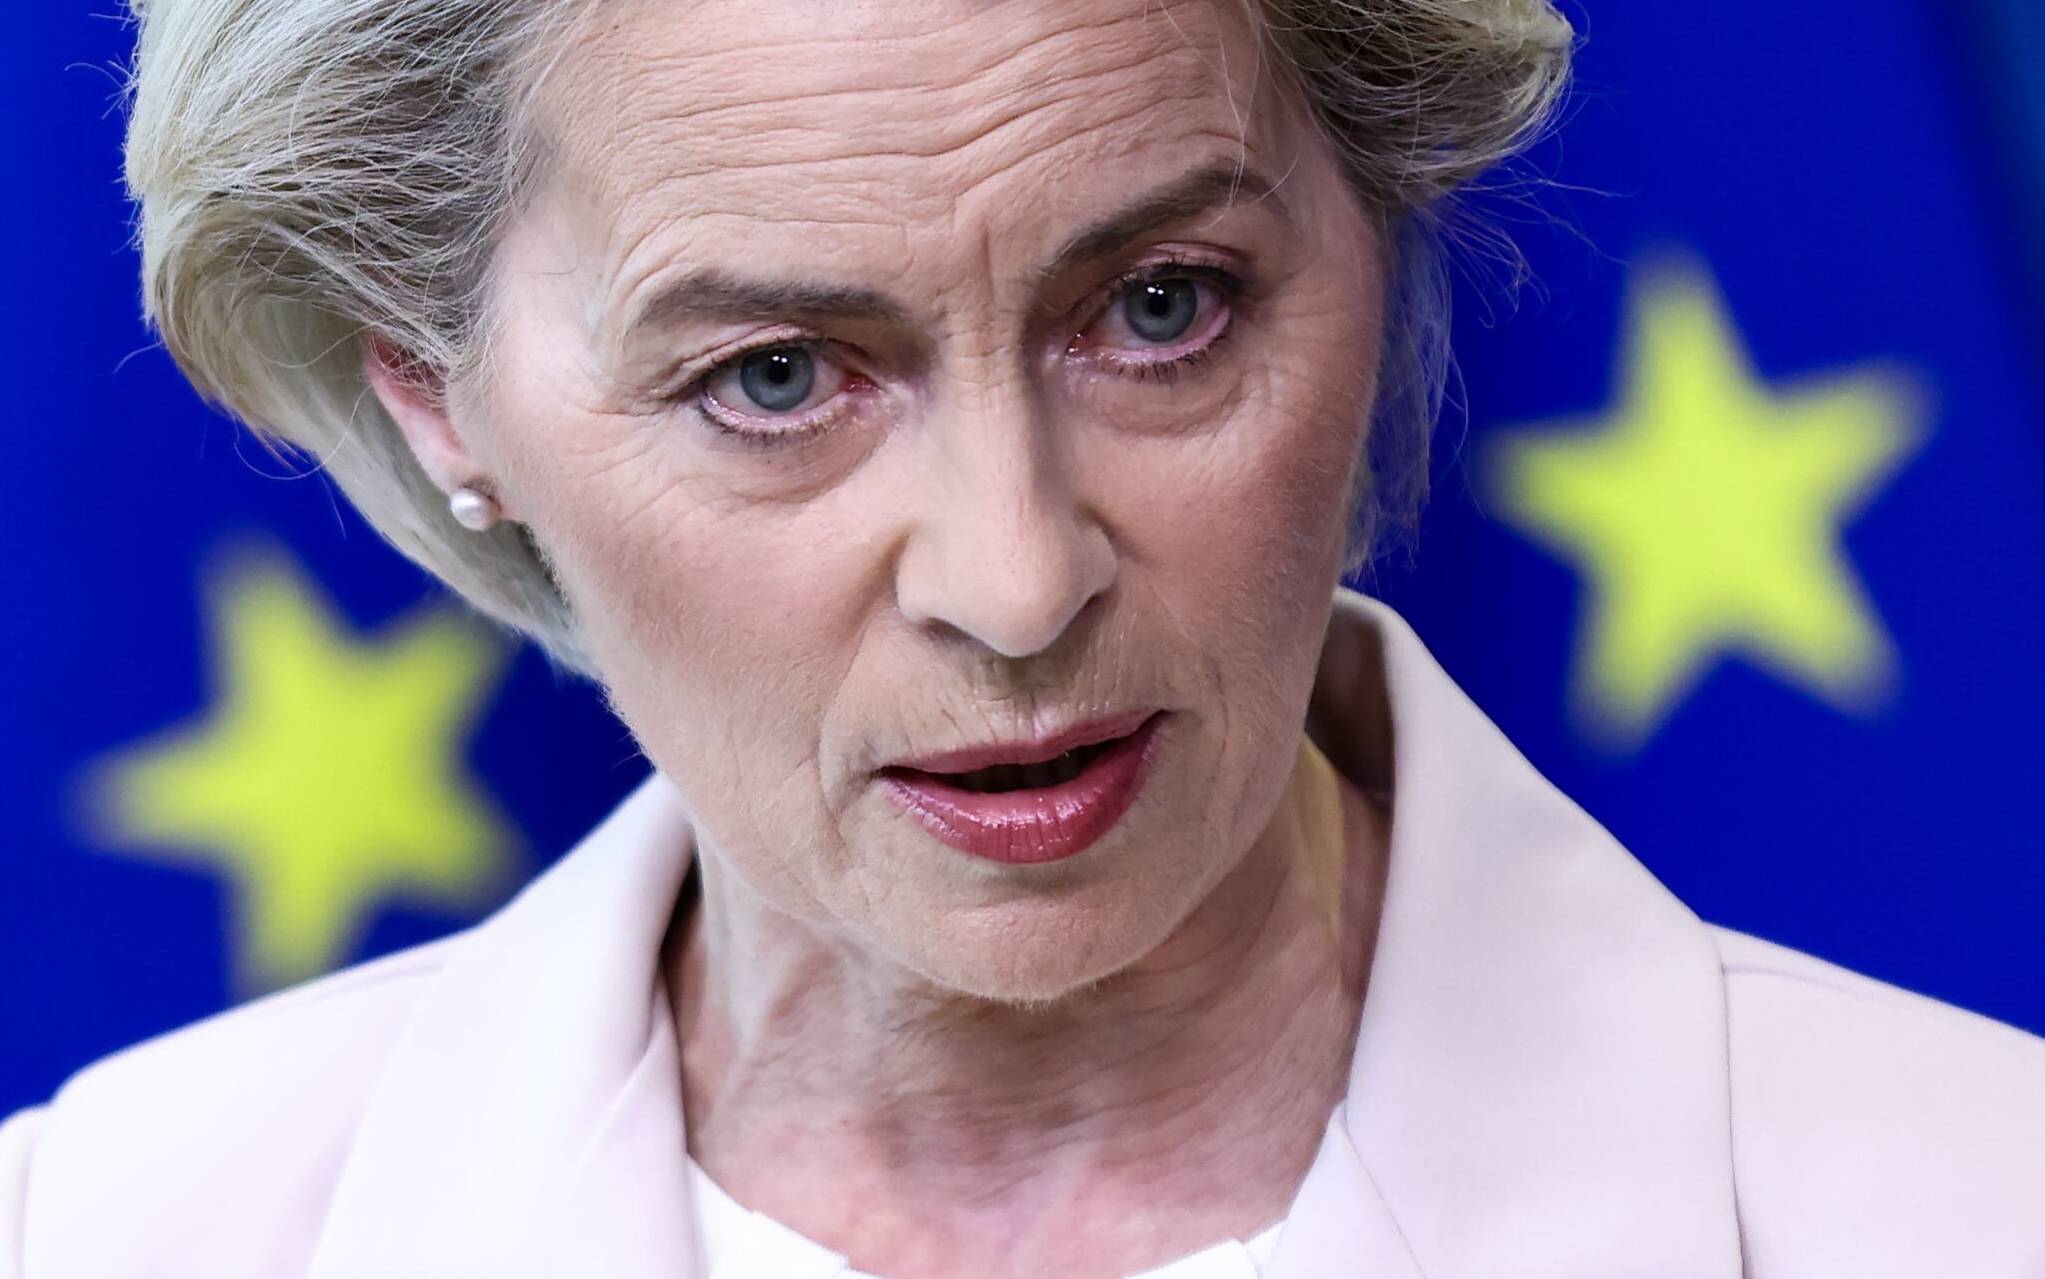 European Commission President Ursula von der Leyen makes a statement in Brussels on April 27, 2022, following the decision by Russian energy giant Gazprom to halt gas shipments to Poland and Bulgaria in Moscow's latest use of gas as a weapon in the conflict in Ukraine. (Photo by Kenzo TRIBOUILLARD / POOL / AFP)